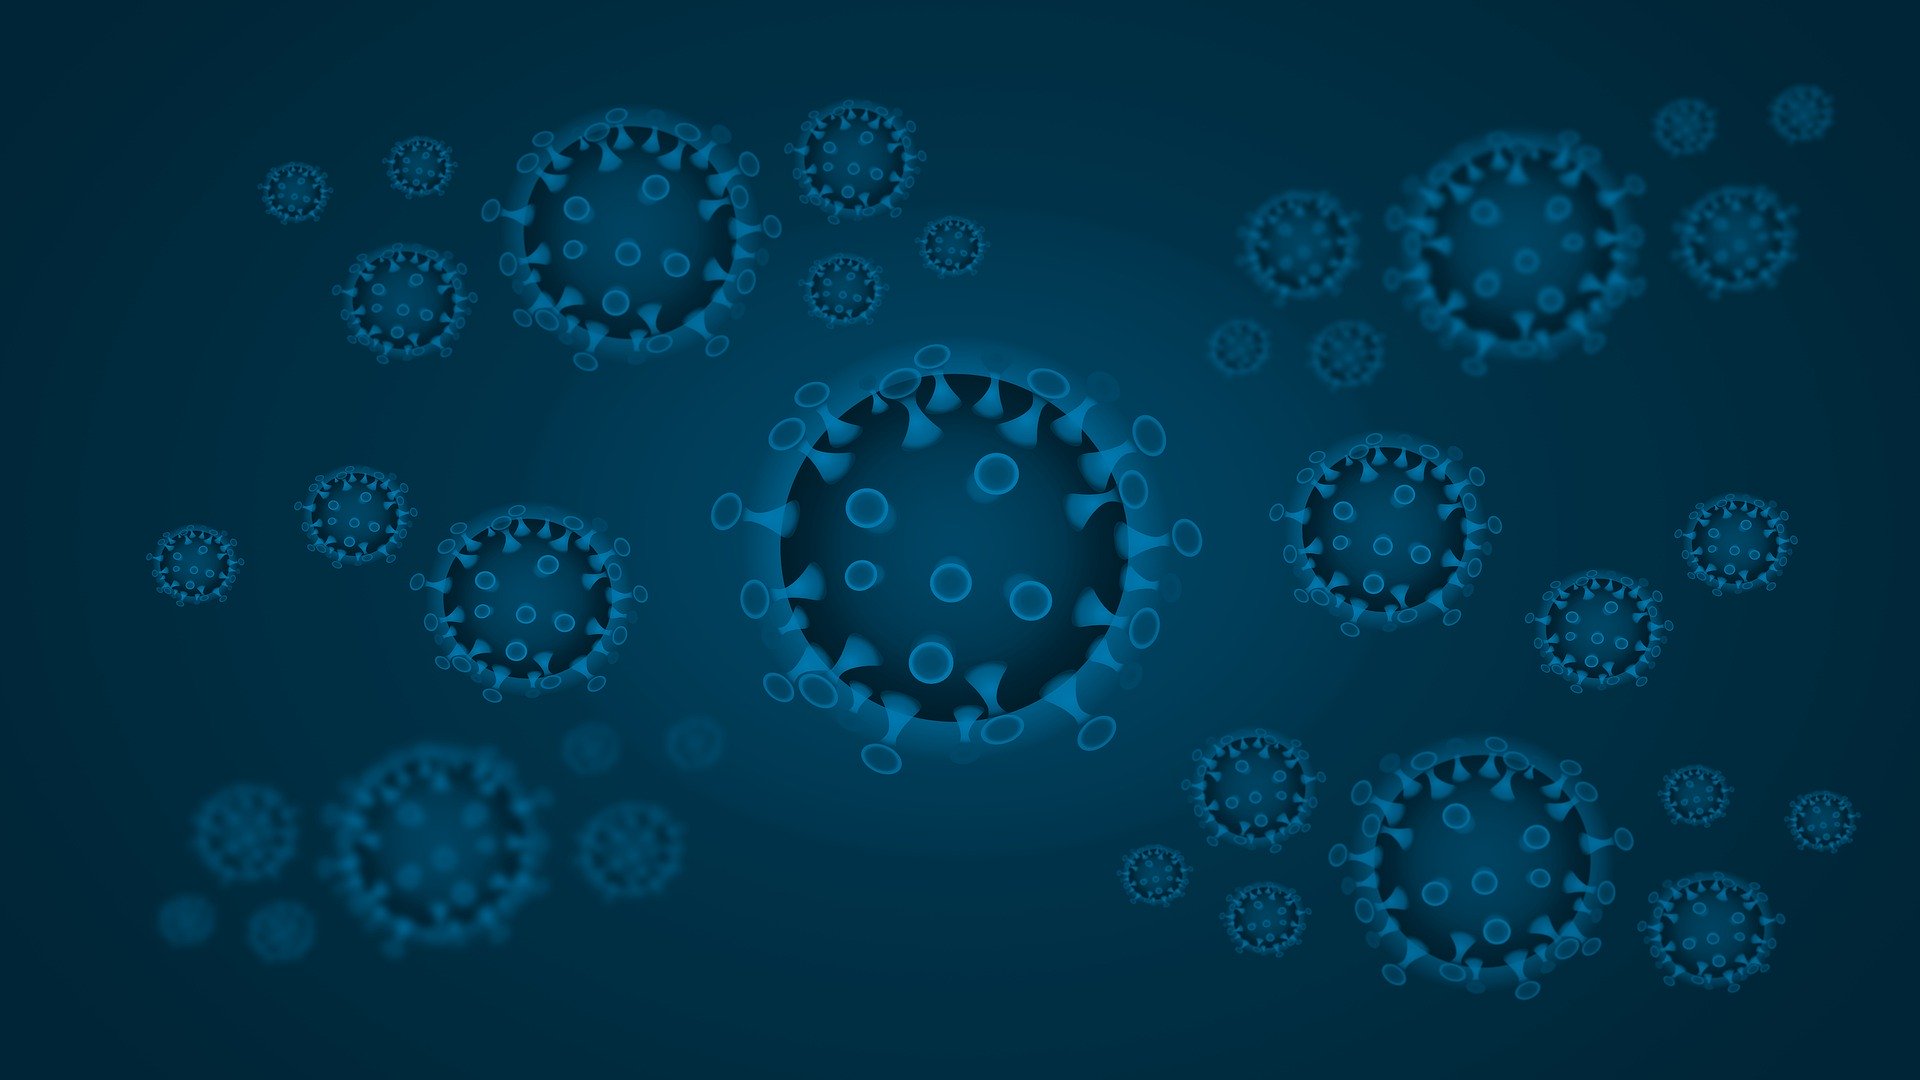 Freelancing During Coronavirus? Take These Steps To Keep Your Business Going